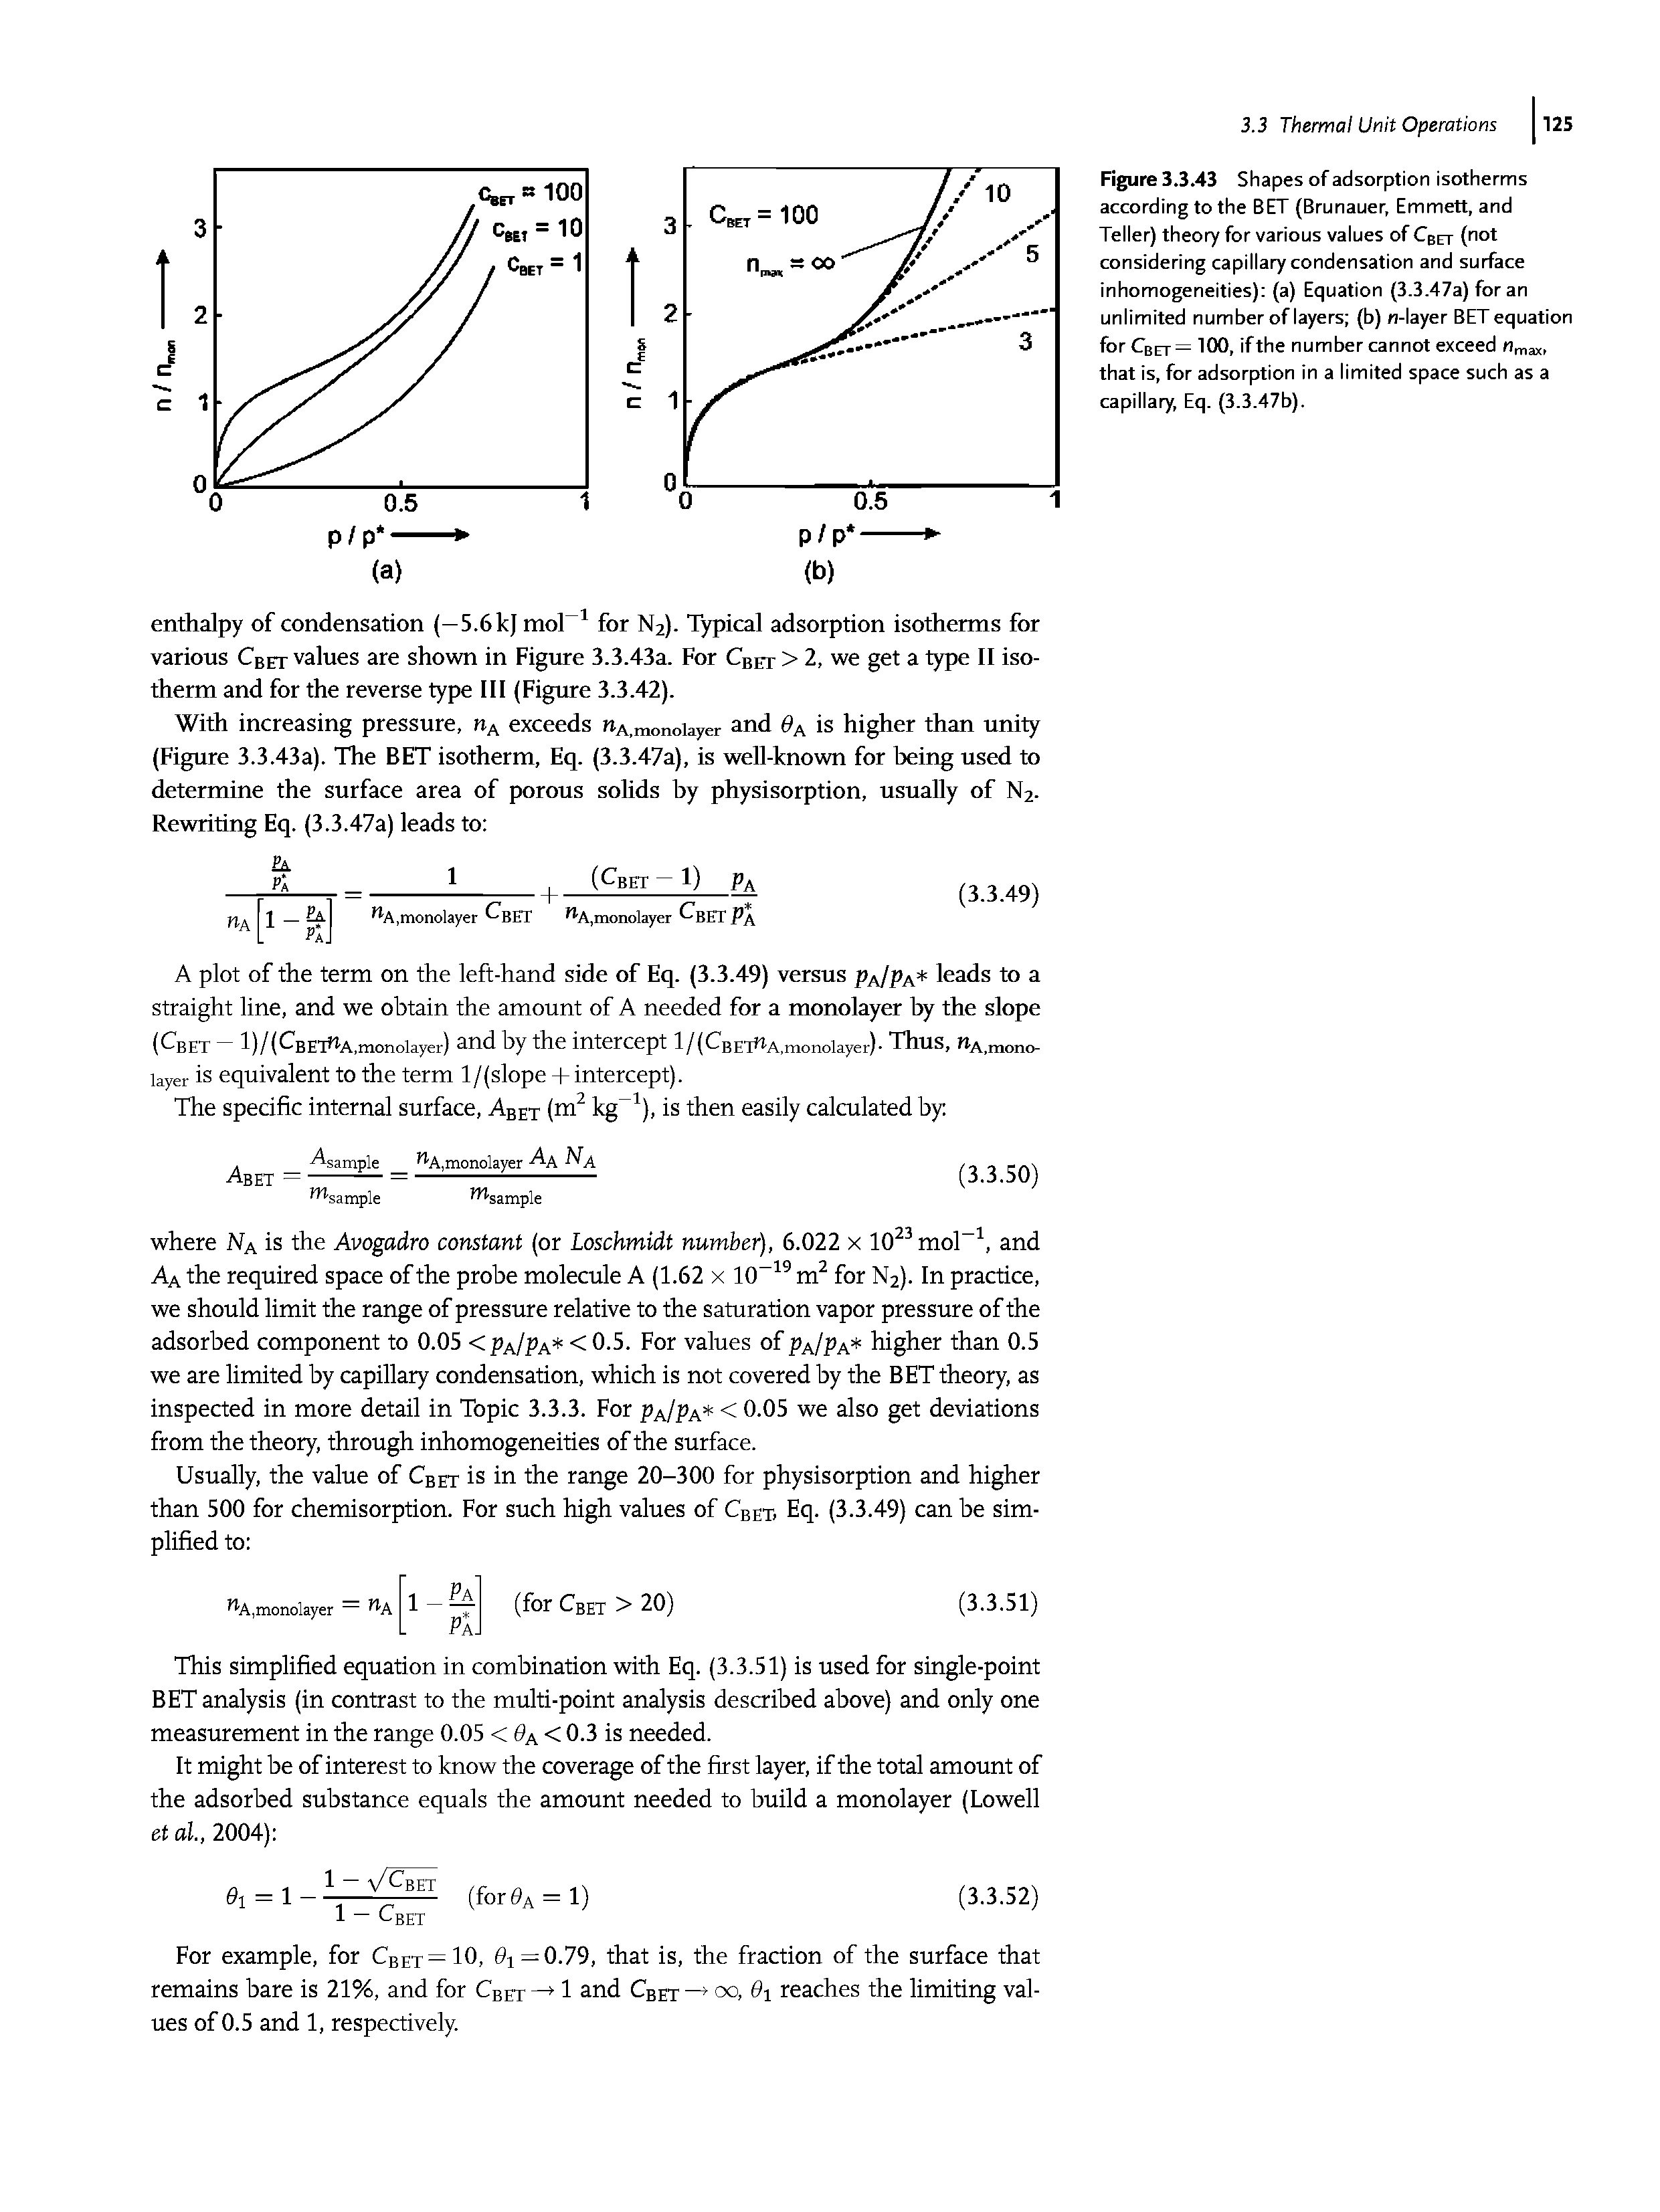 Figure 3.3.43 Shapes of adsorption isotherms according to the BET (Brunauer, Emmett, and Teller) theory for various values of Cbet (not considering capillary condensation and surface inhomogeneities) (a) Equation (3.3.47a) for an unlimited number of layers (b) n-layer BET equation for Cbet = 100, if the number cannot exceed Umax, that is, for adsorption in a limited space such as a capillary, Eq. (3.3.47b).